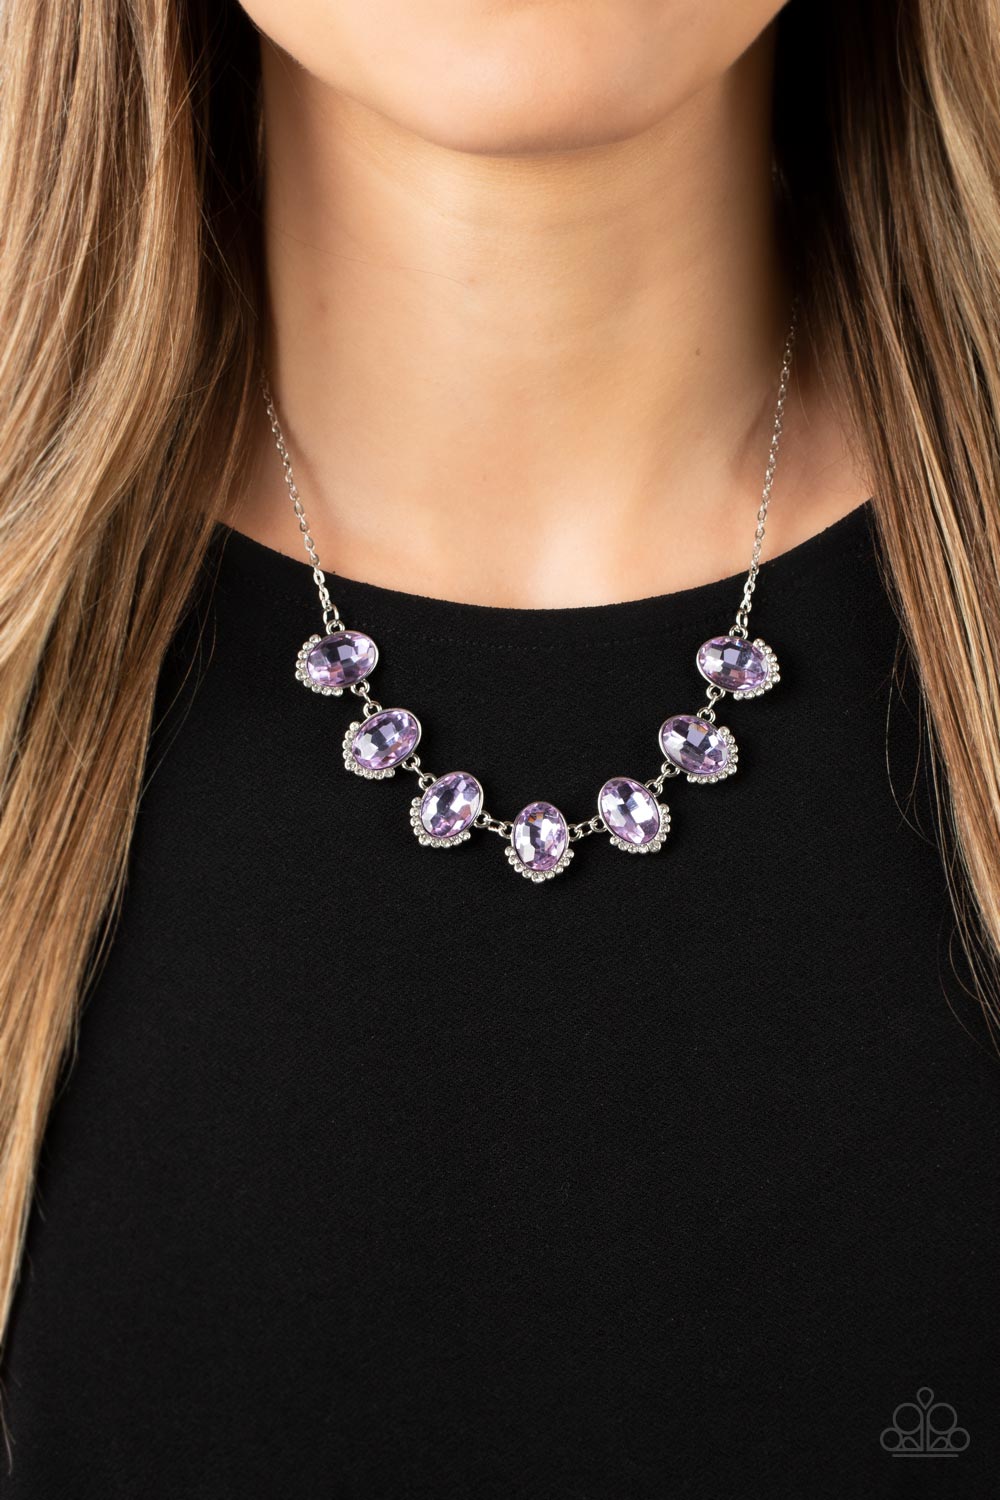 Unleash Your Sparkle - Purple Rhinestone Necklaces dainty rows of glittery white rhinestones gently curve around the bottoms of oversized Very Peri oval gems. The sparkly frames delicately connect below the collar, creating a colorful centerpiece. Features an adjustable clasp closure.  Sold as one individual necklace. Includes one pair of matching earrings.